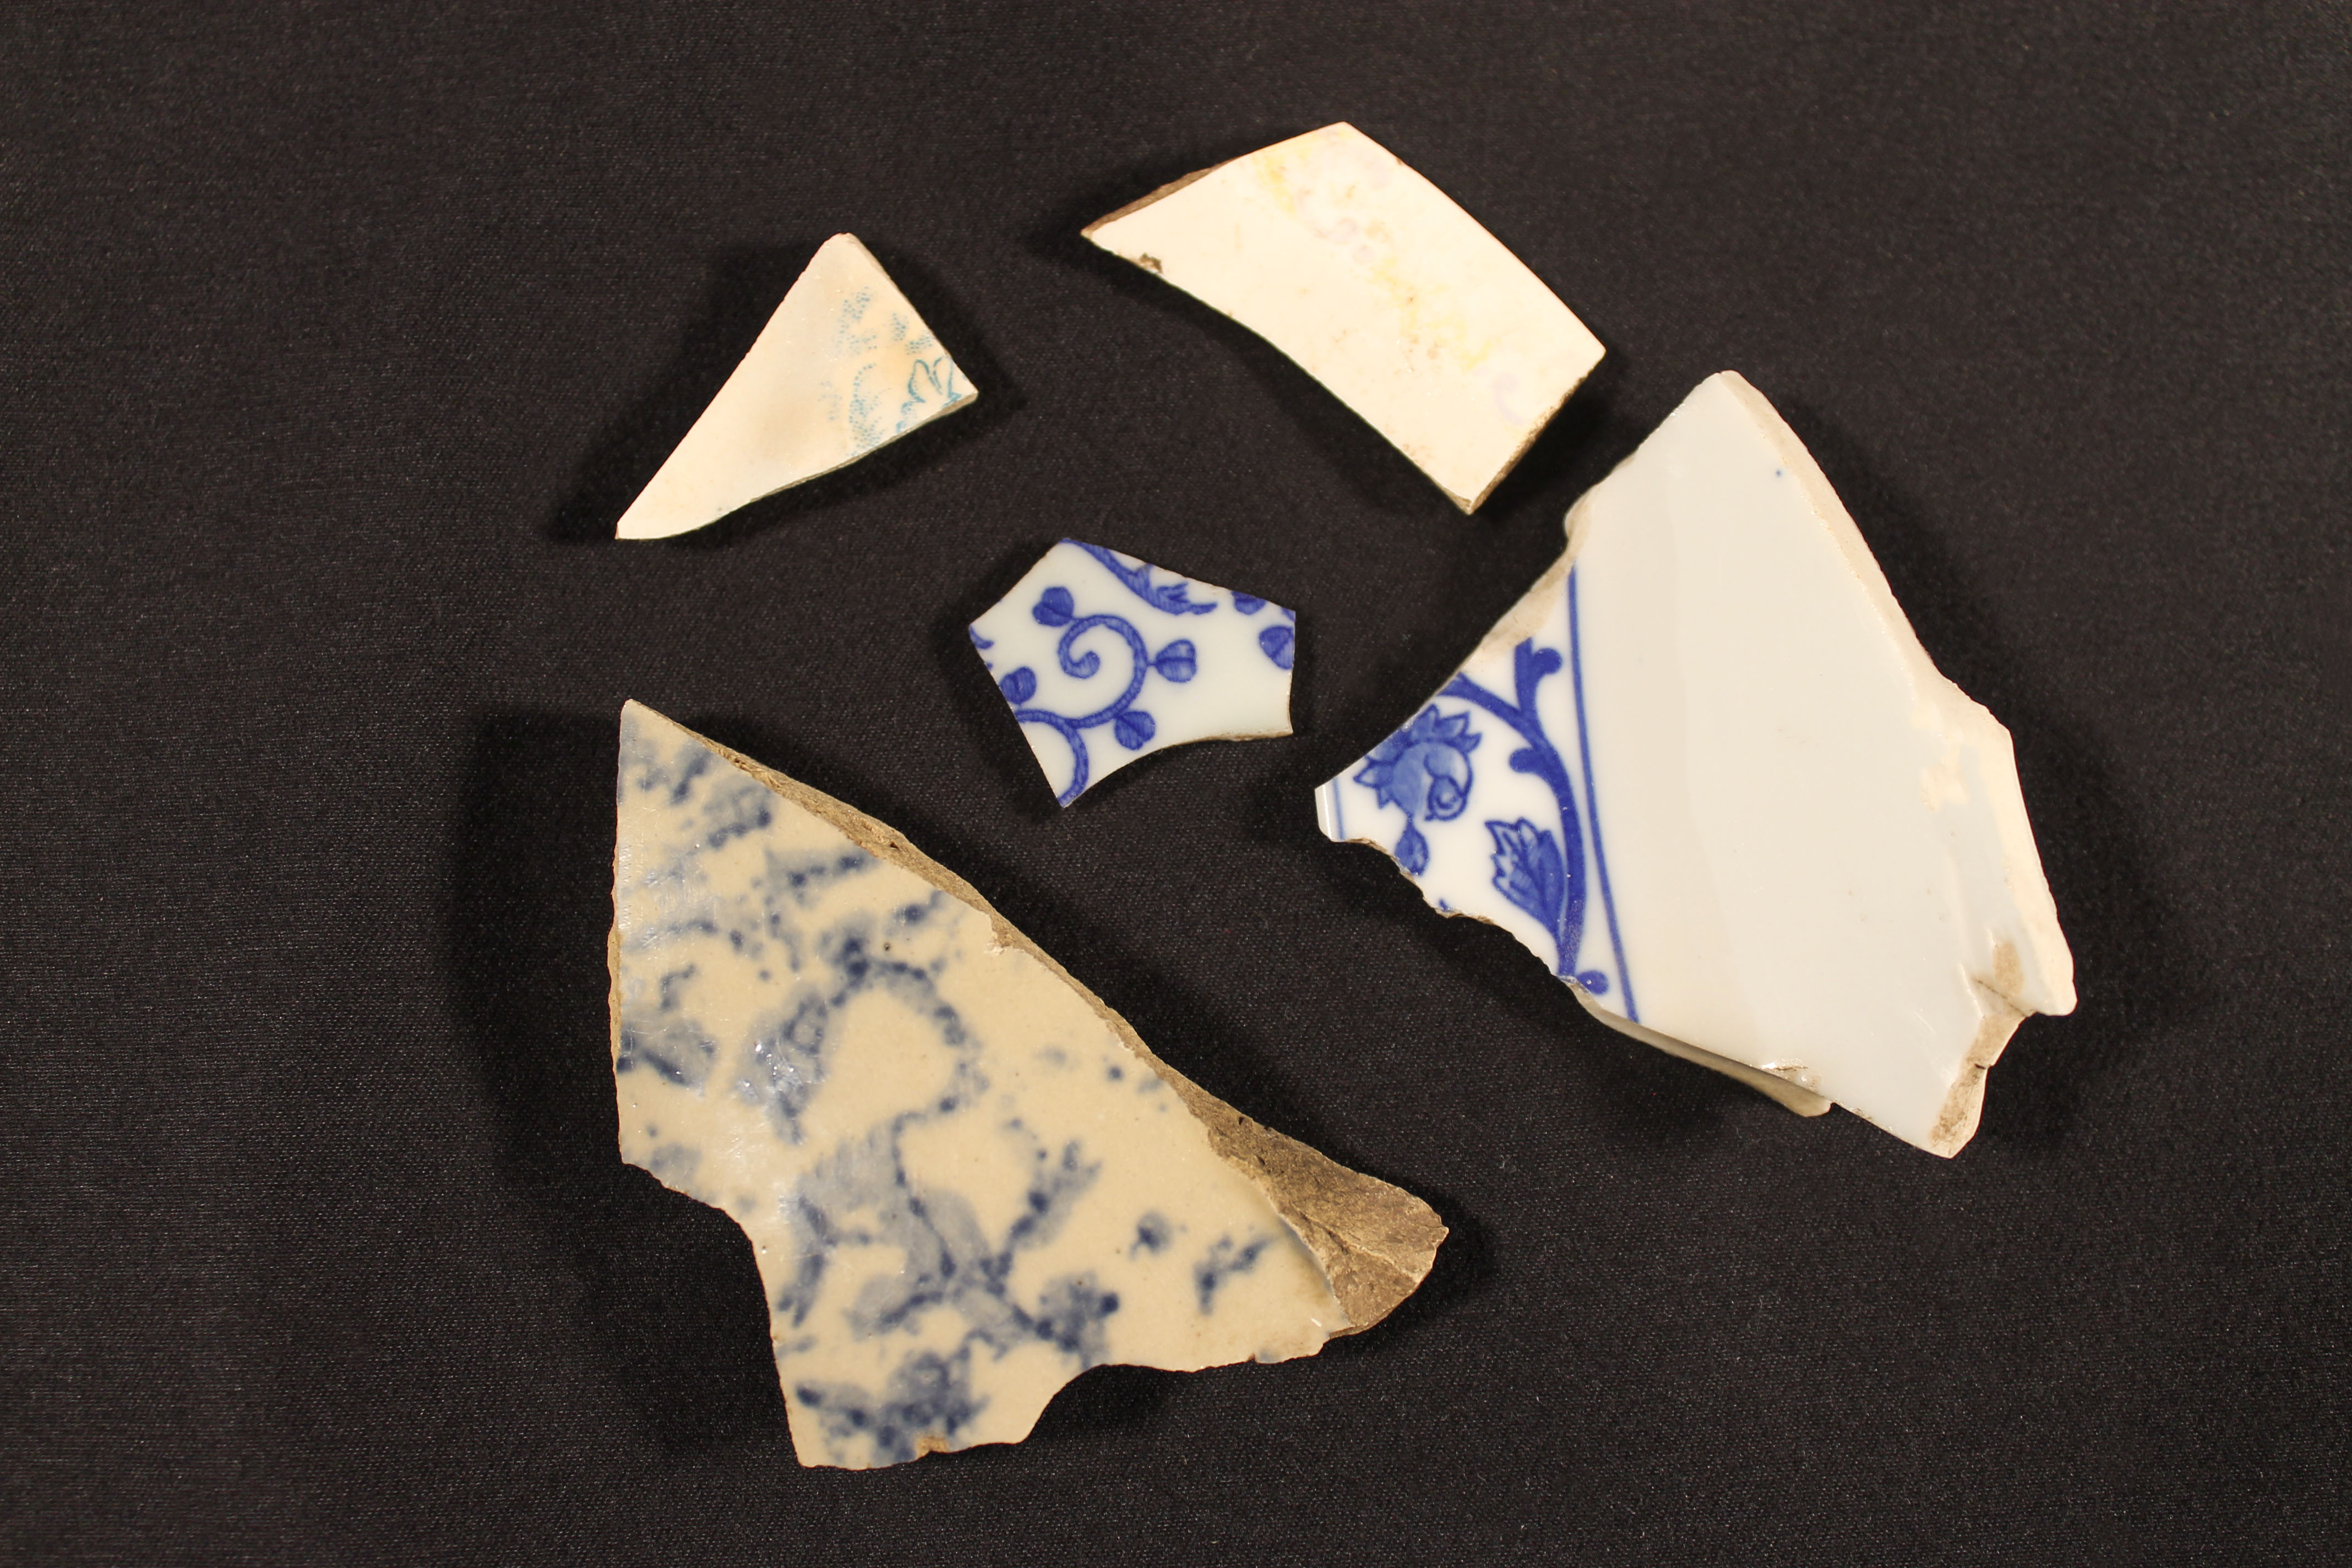 Five broken pieces of white pottery that have blue flowers on them